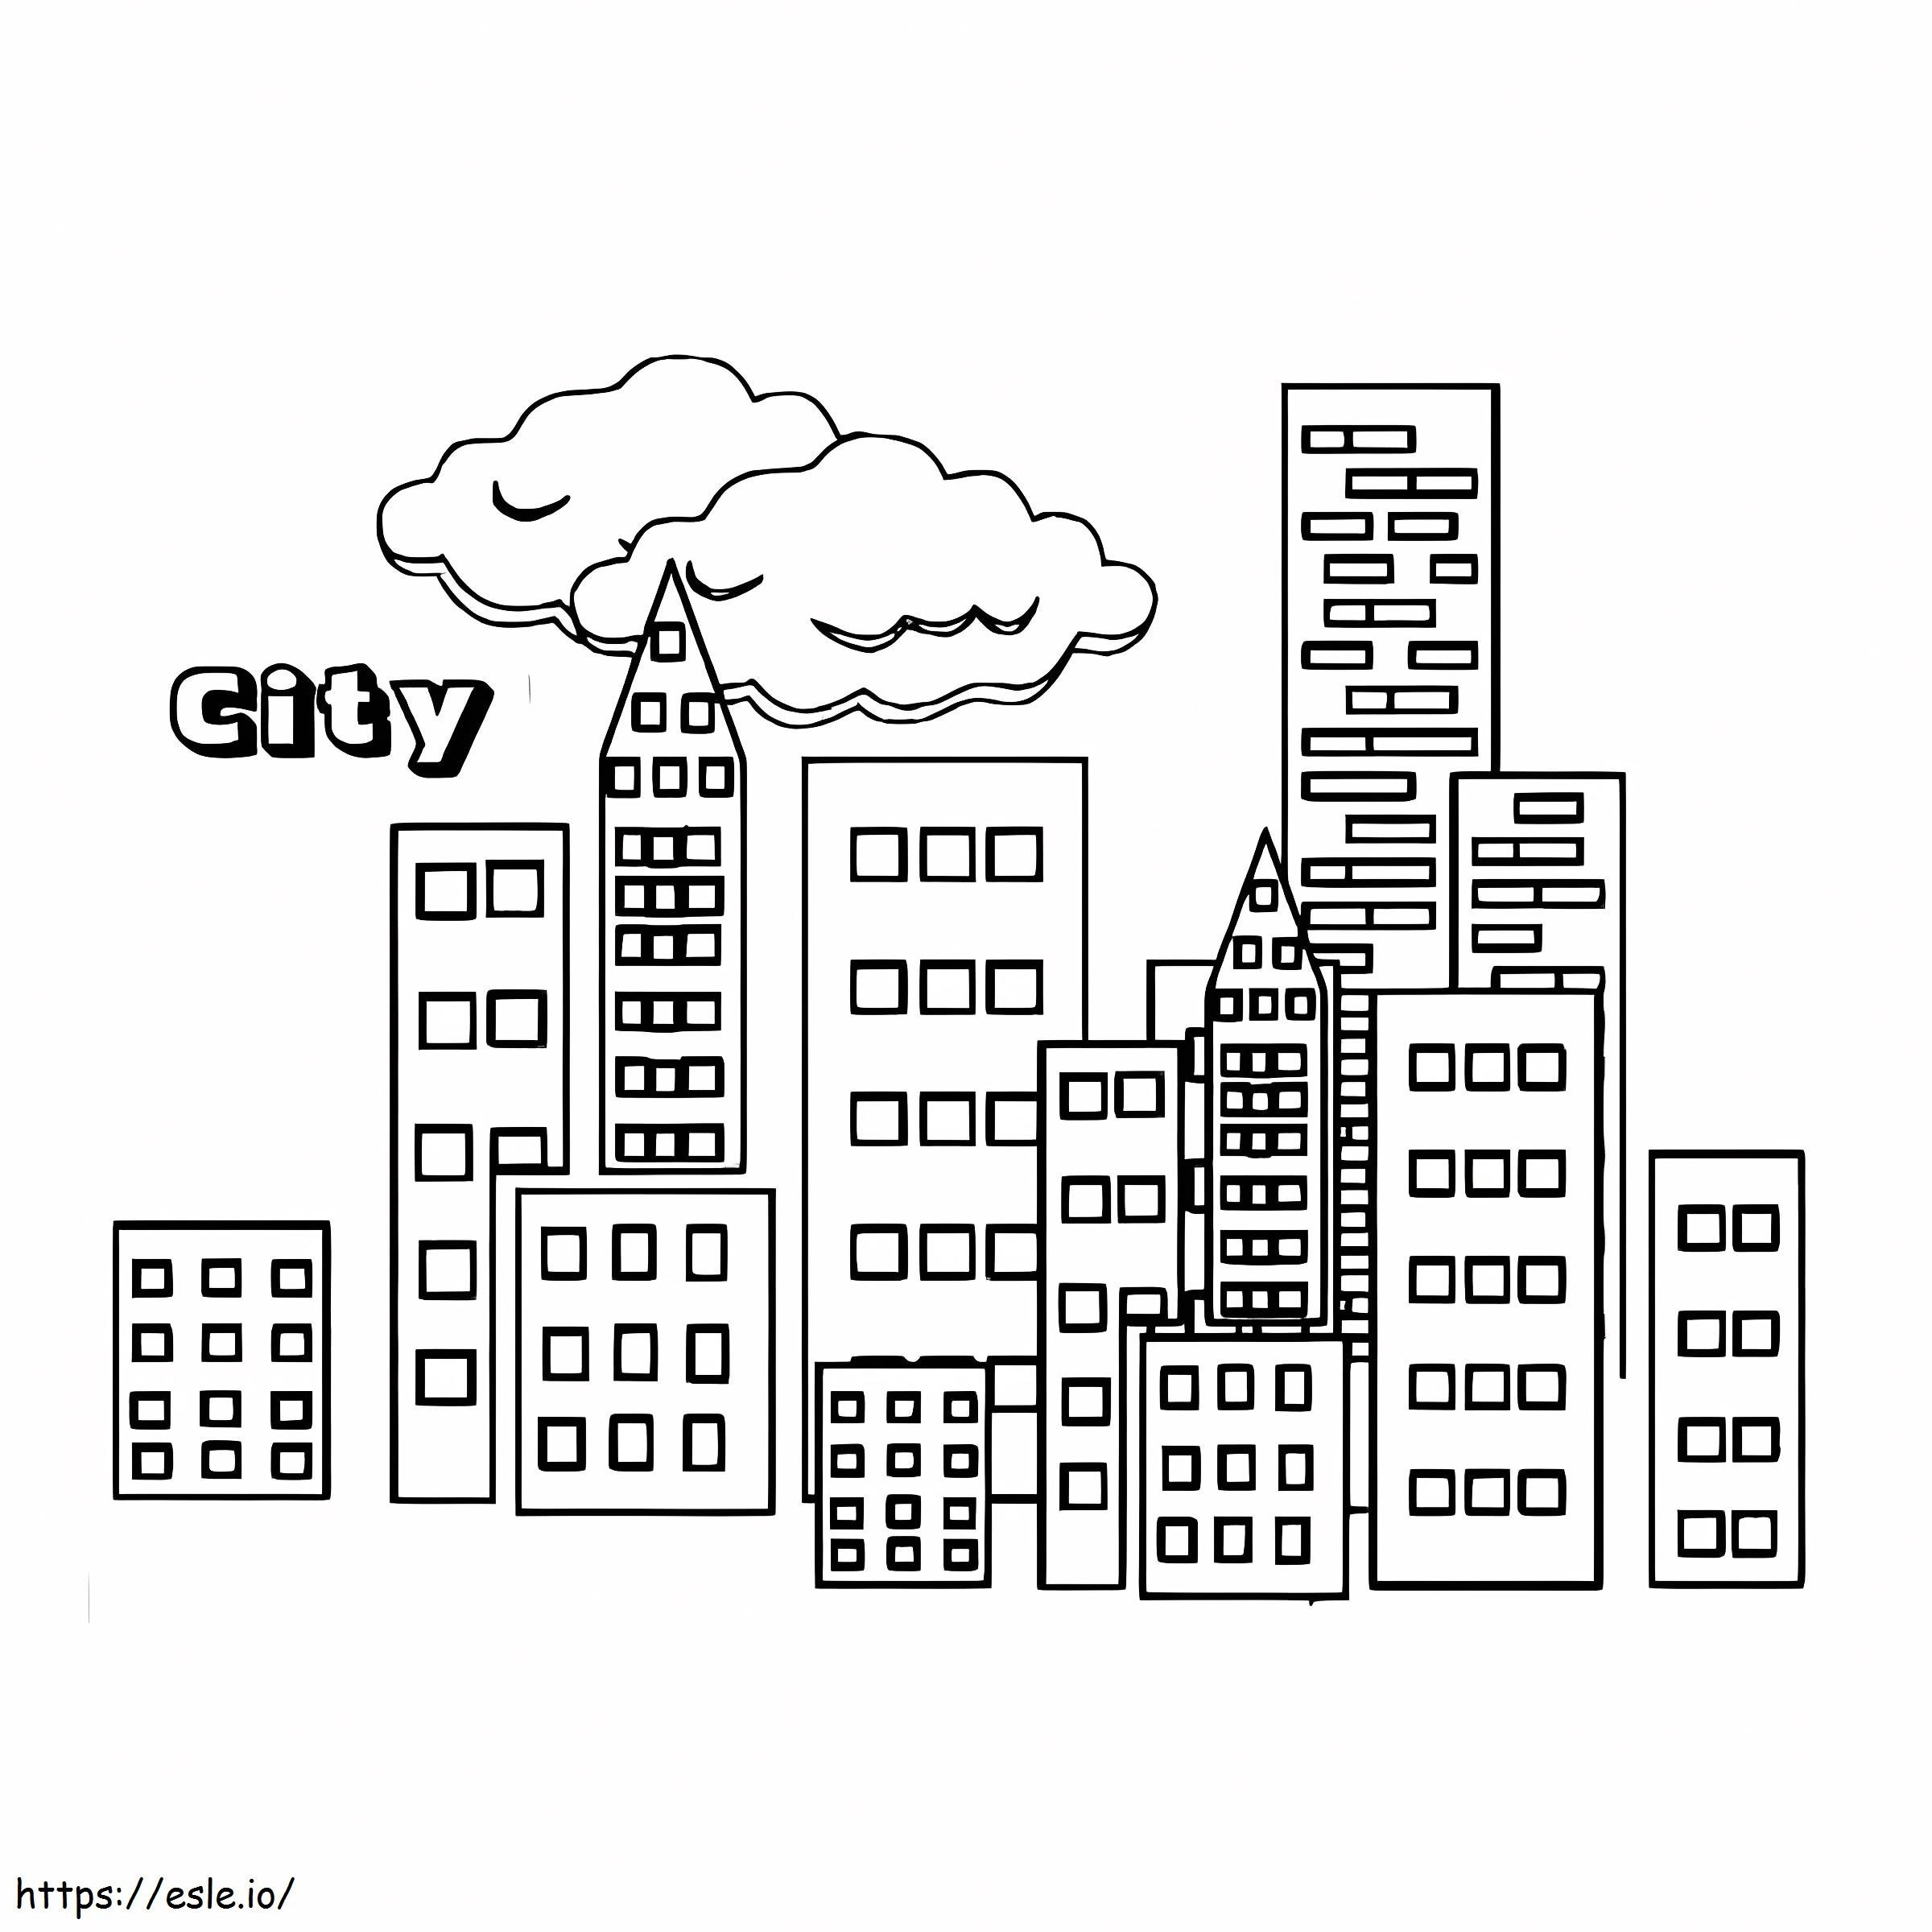 City Building coloring page